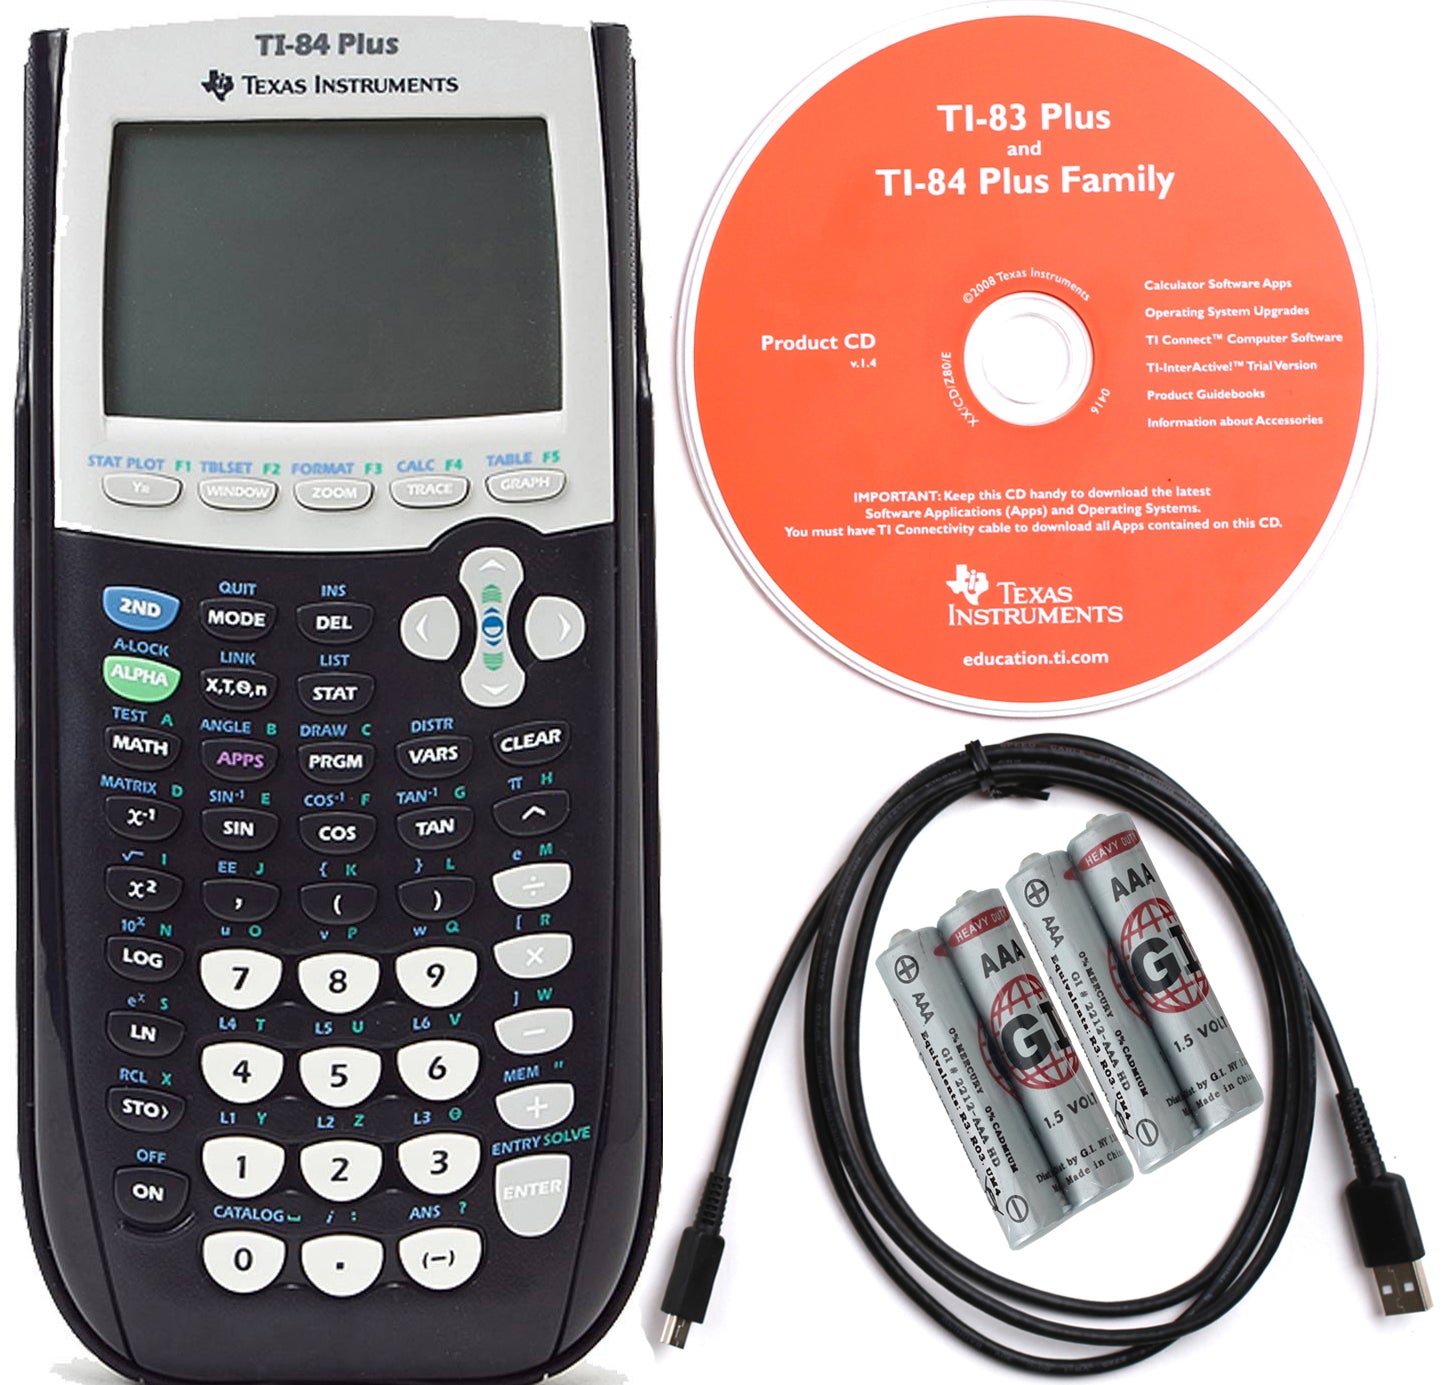 TEXAS INSTRUMENTS TI 84 PLUS GRAPHING CALCULATOR Refurbished – 